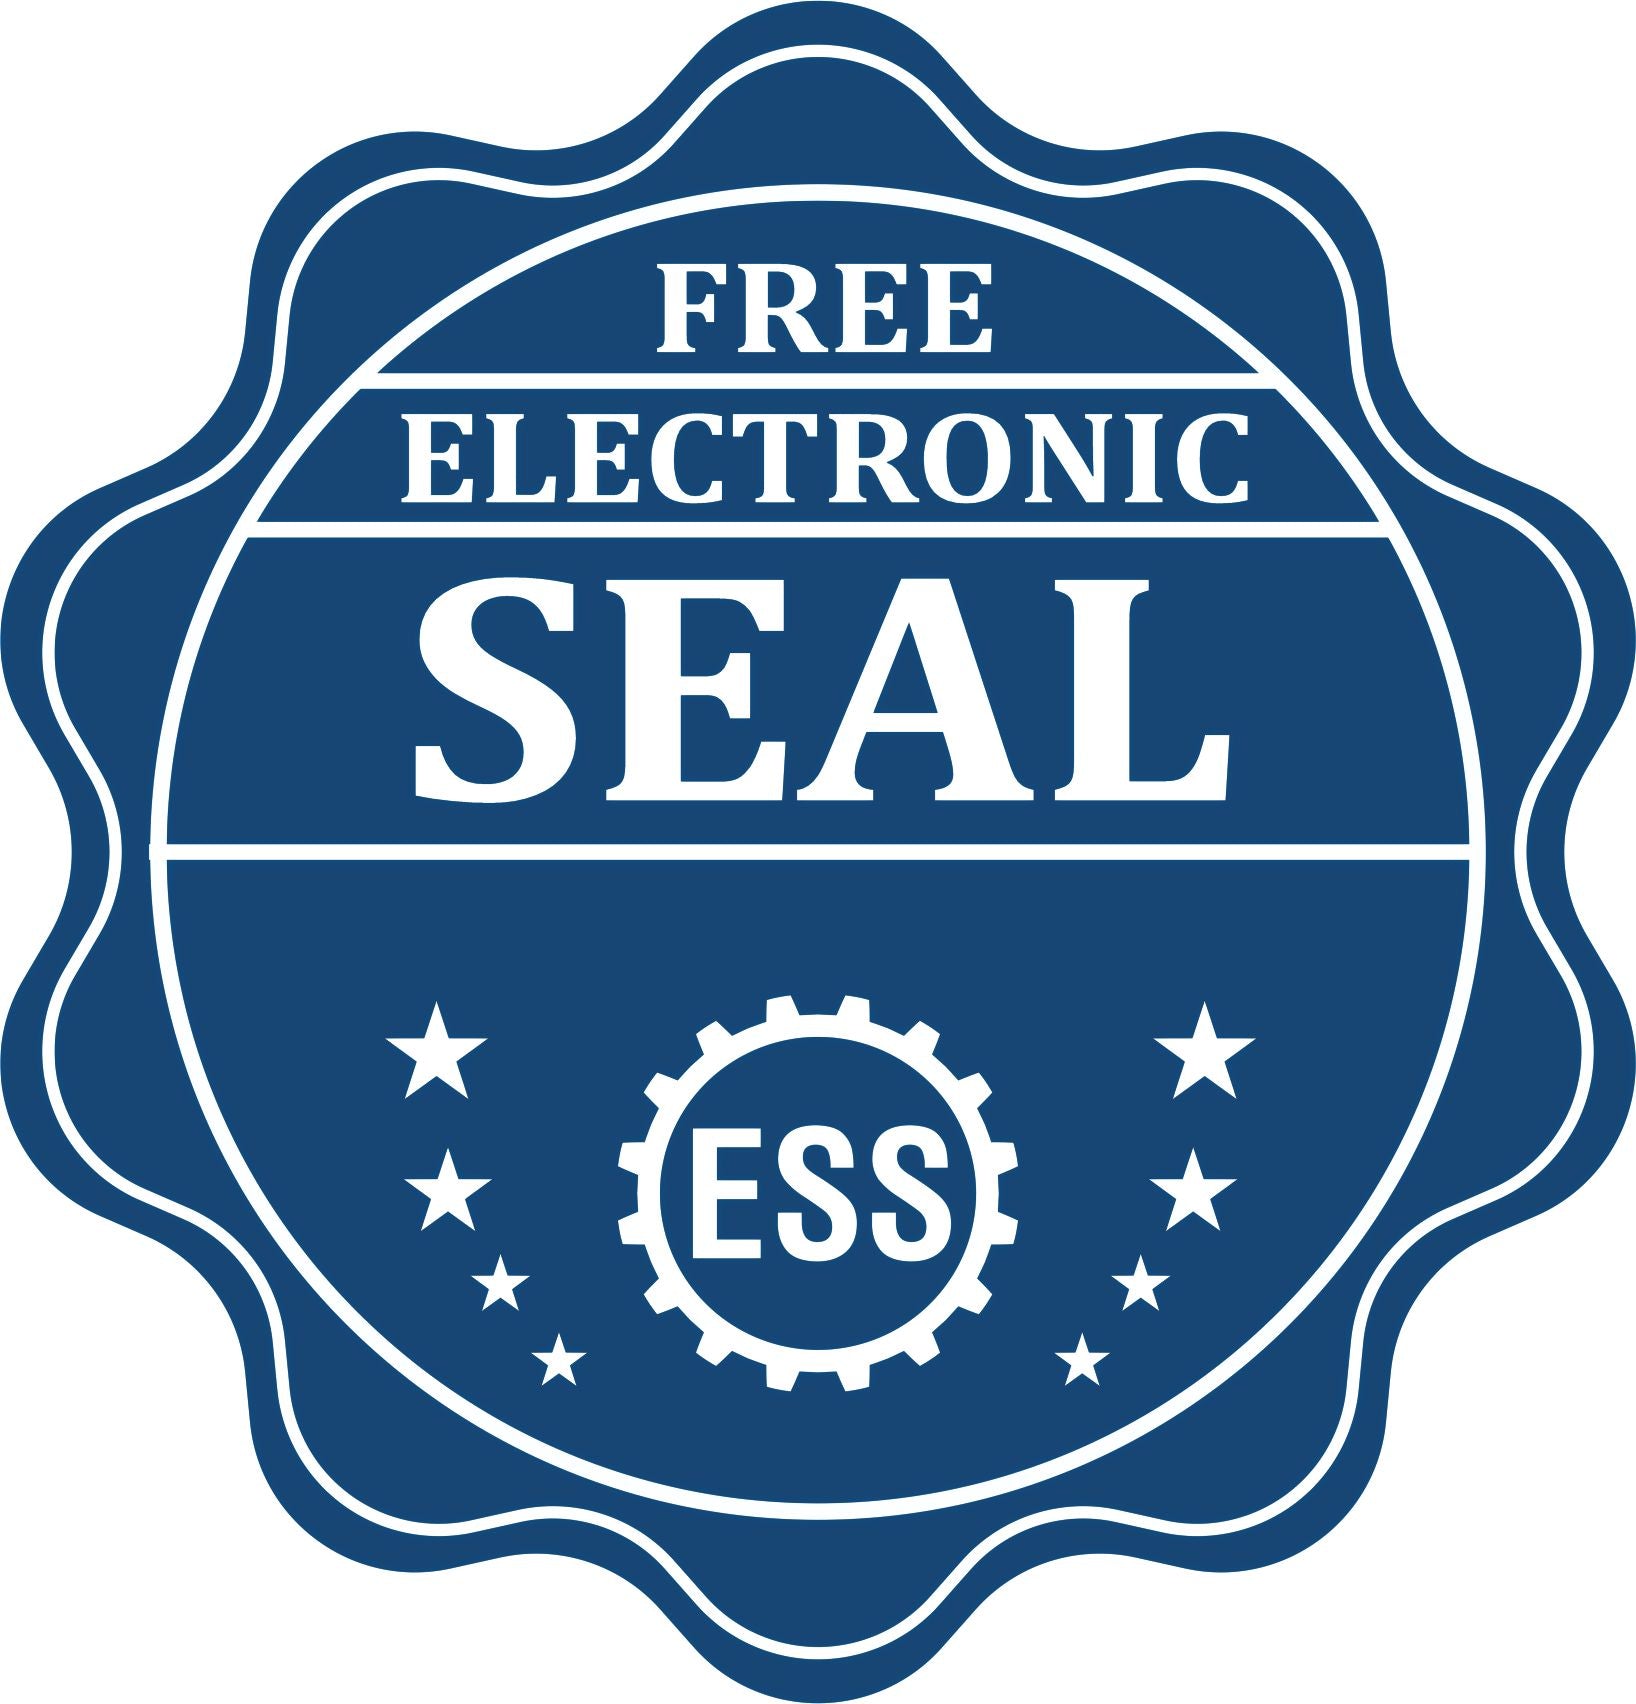 A badge showing a free electronic seal for the Premium MaxLight Pre-Inked Kansas Landscape Architectural Stamp with stars and the ESS gear on the emblem.